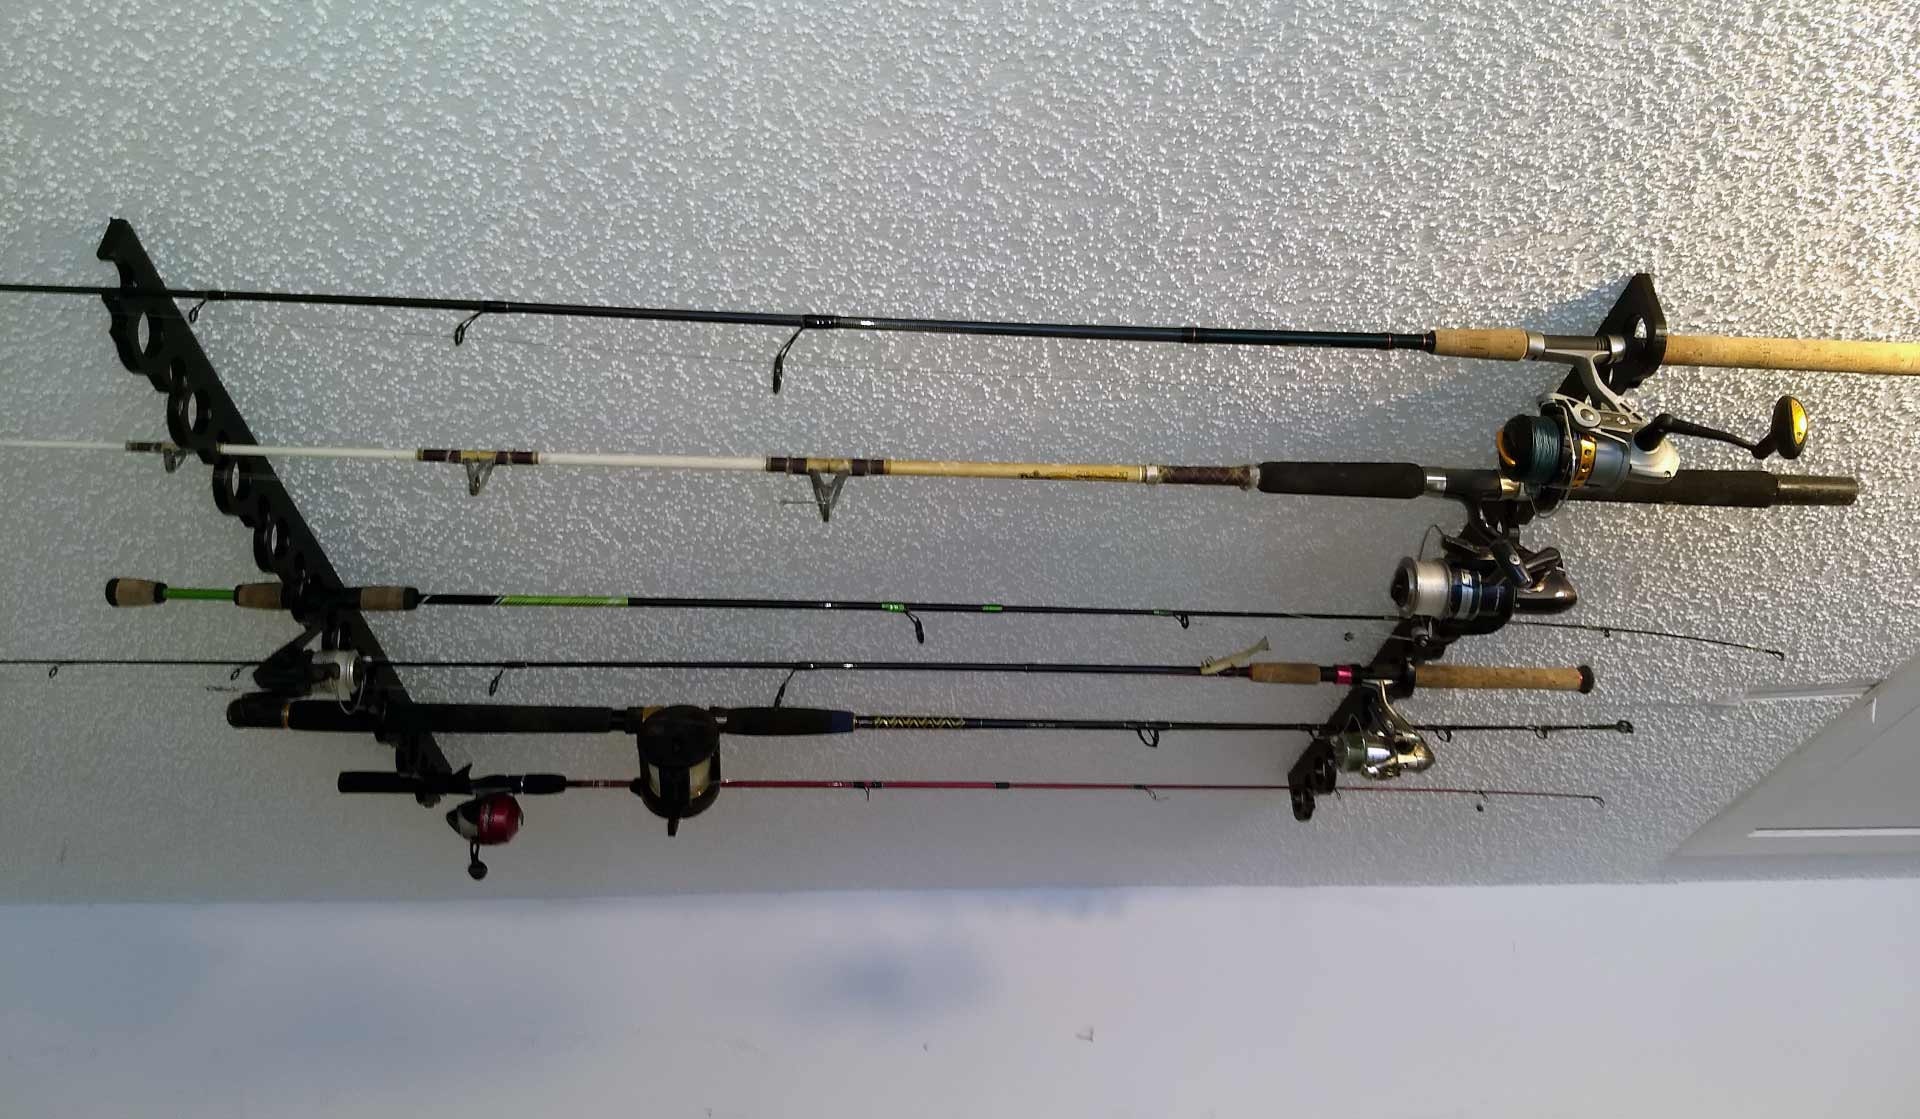 21 INSHORE Fishing Rod Rack Holder Garage Ceiling or Wall Mounted